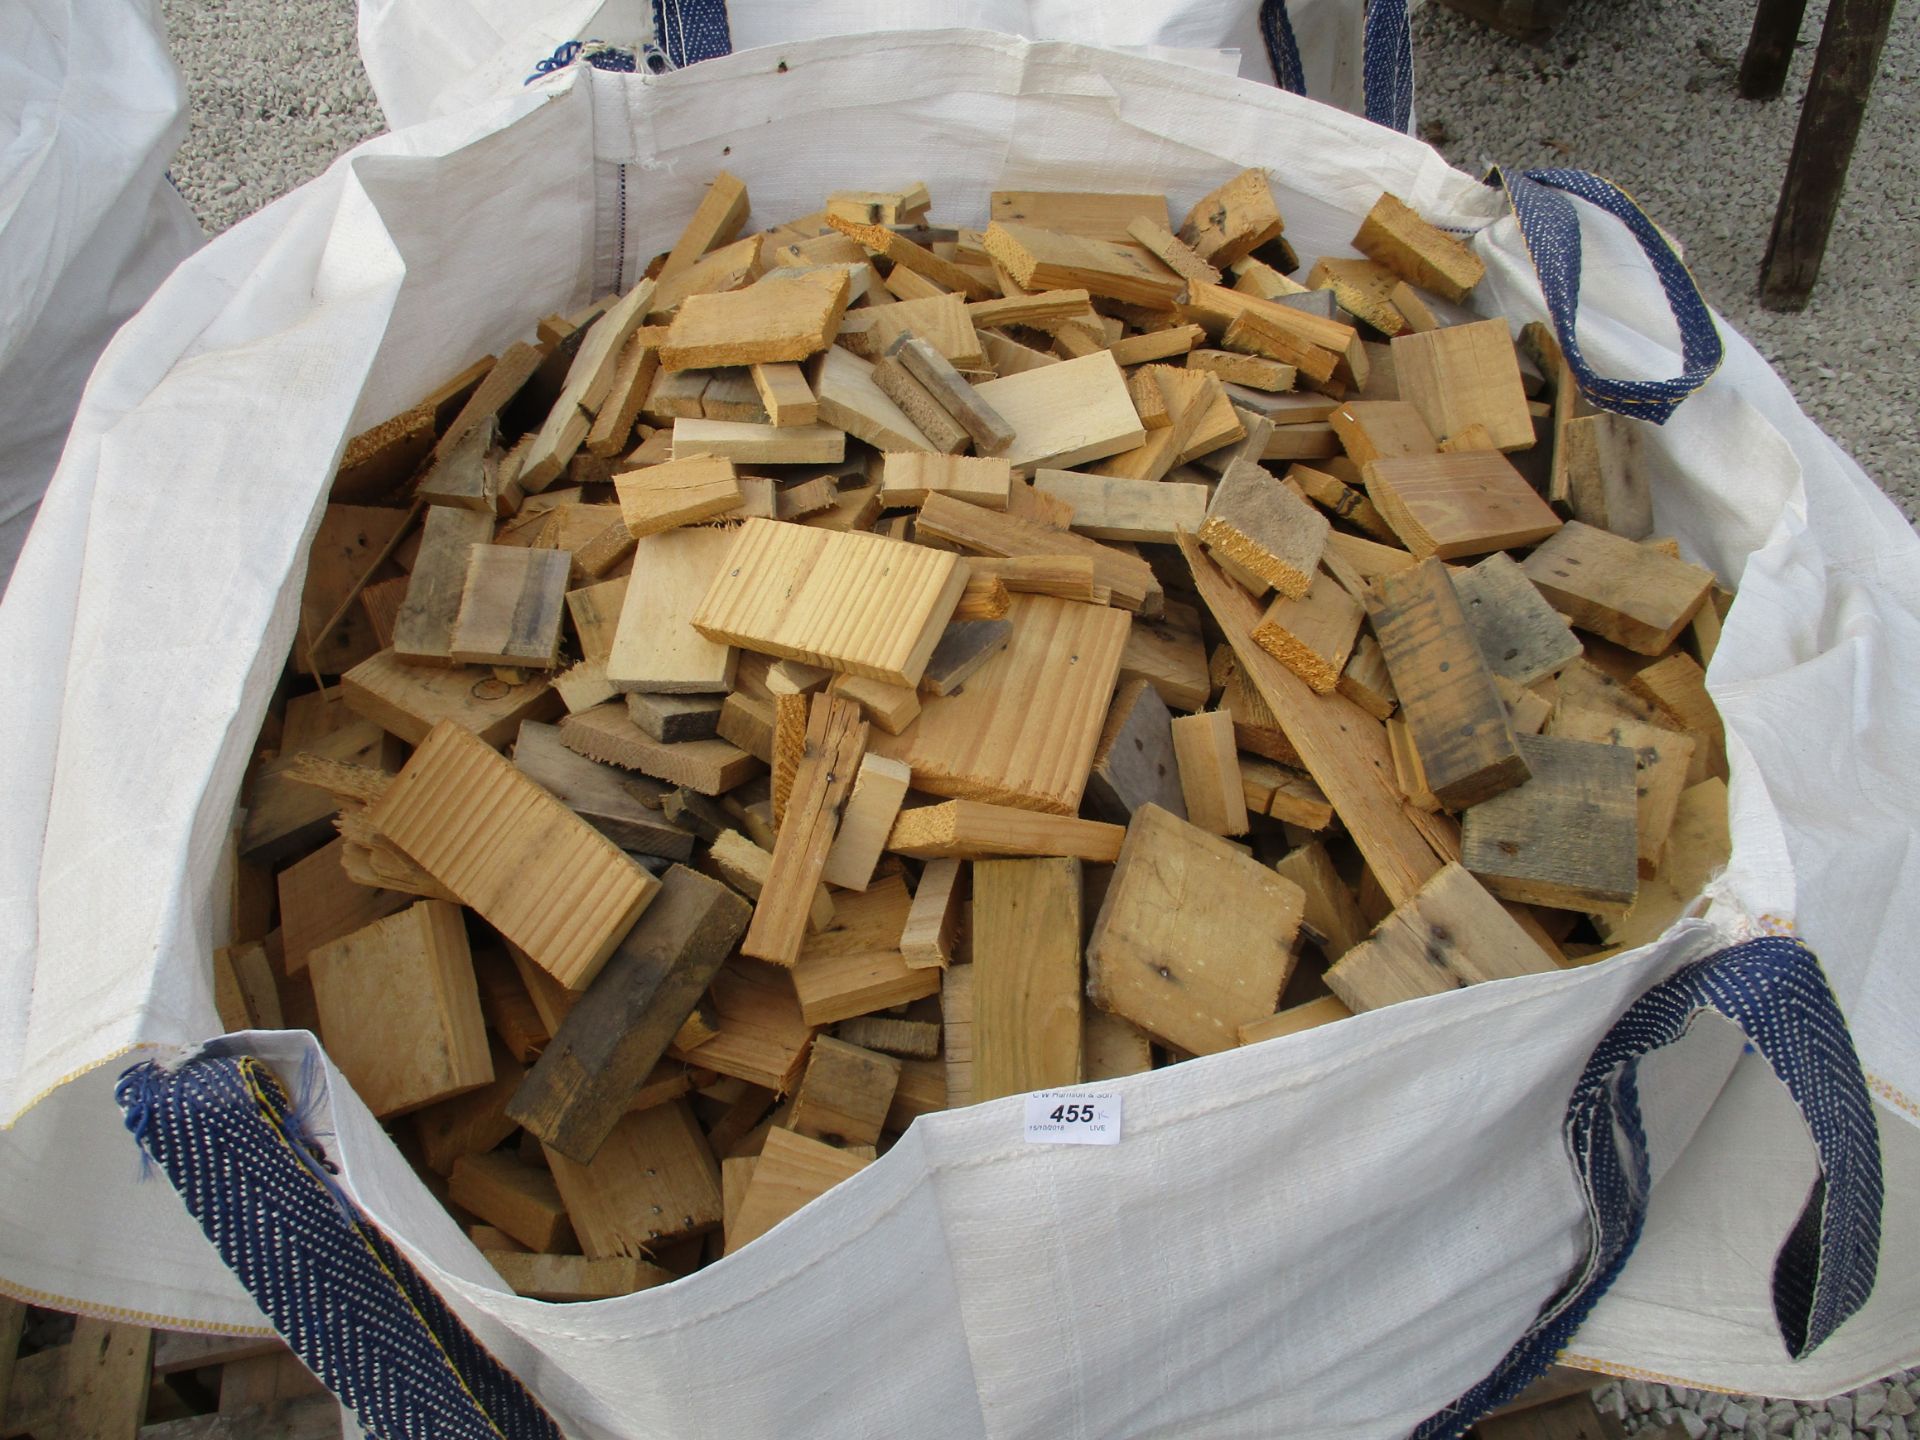 Contents to bag - off cut wood and kindl